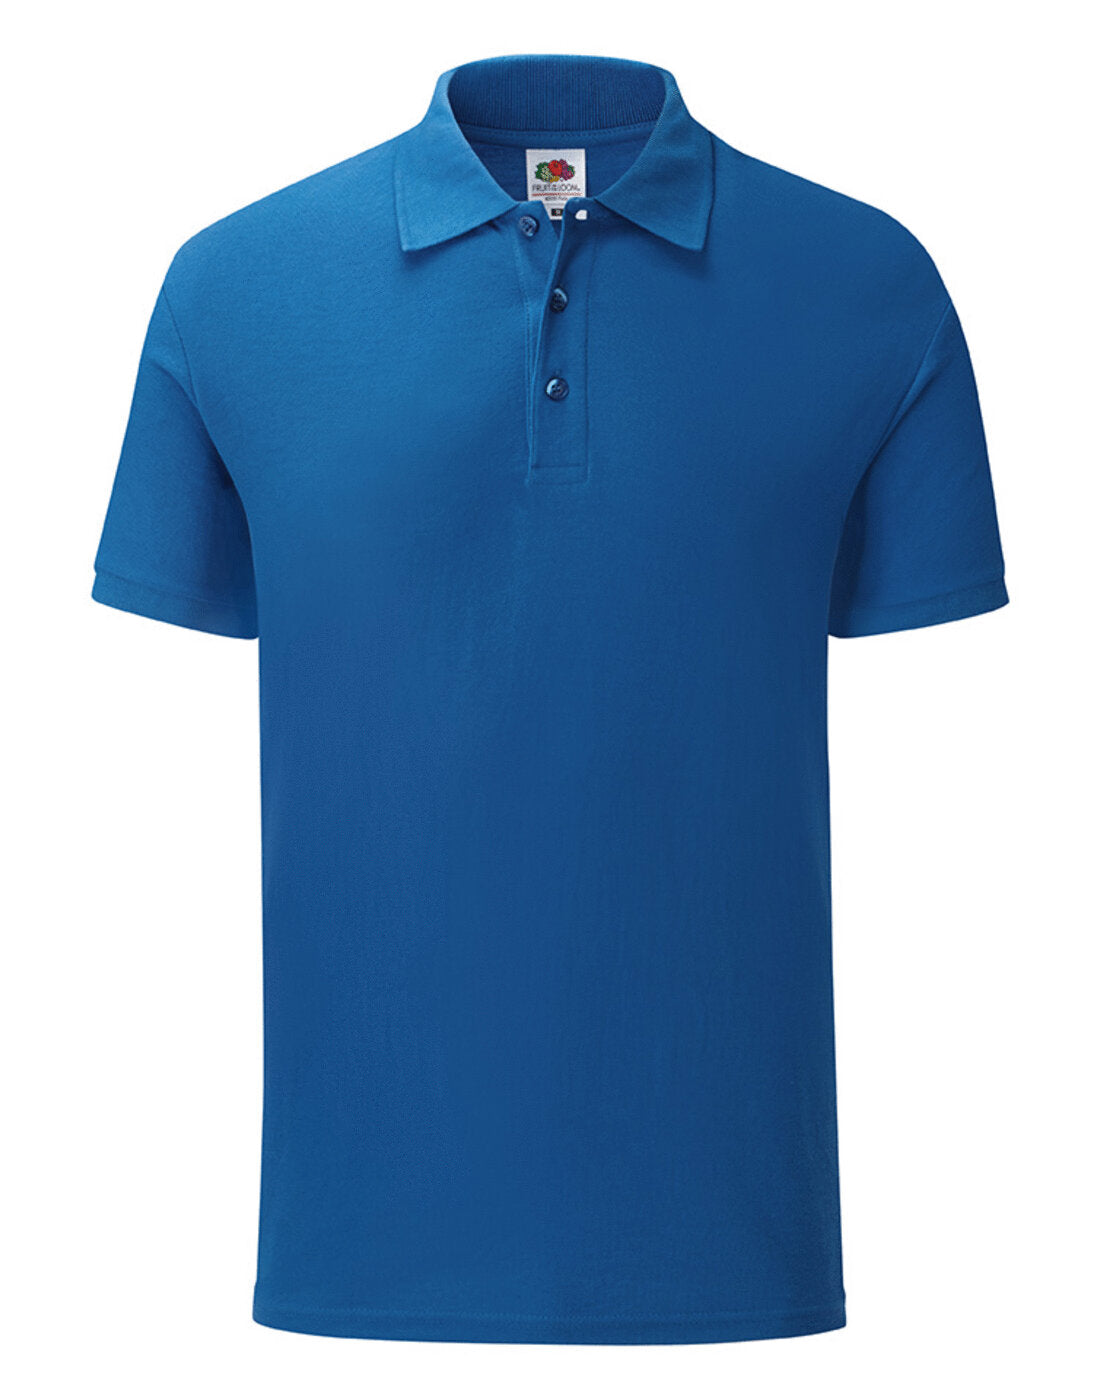 Fruit of the Loom 65/35 Tailored Fit Polo - Royal